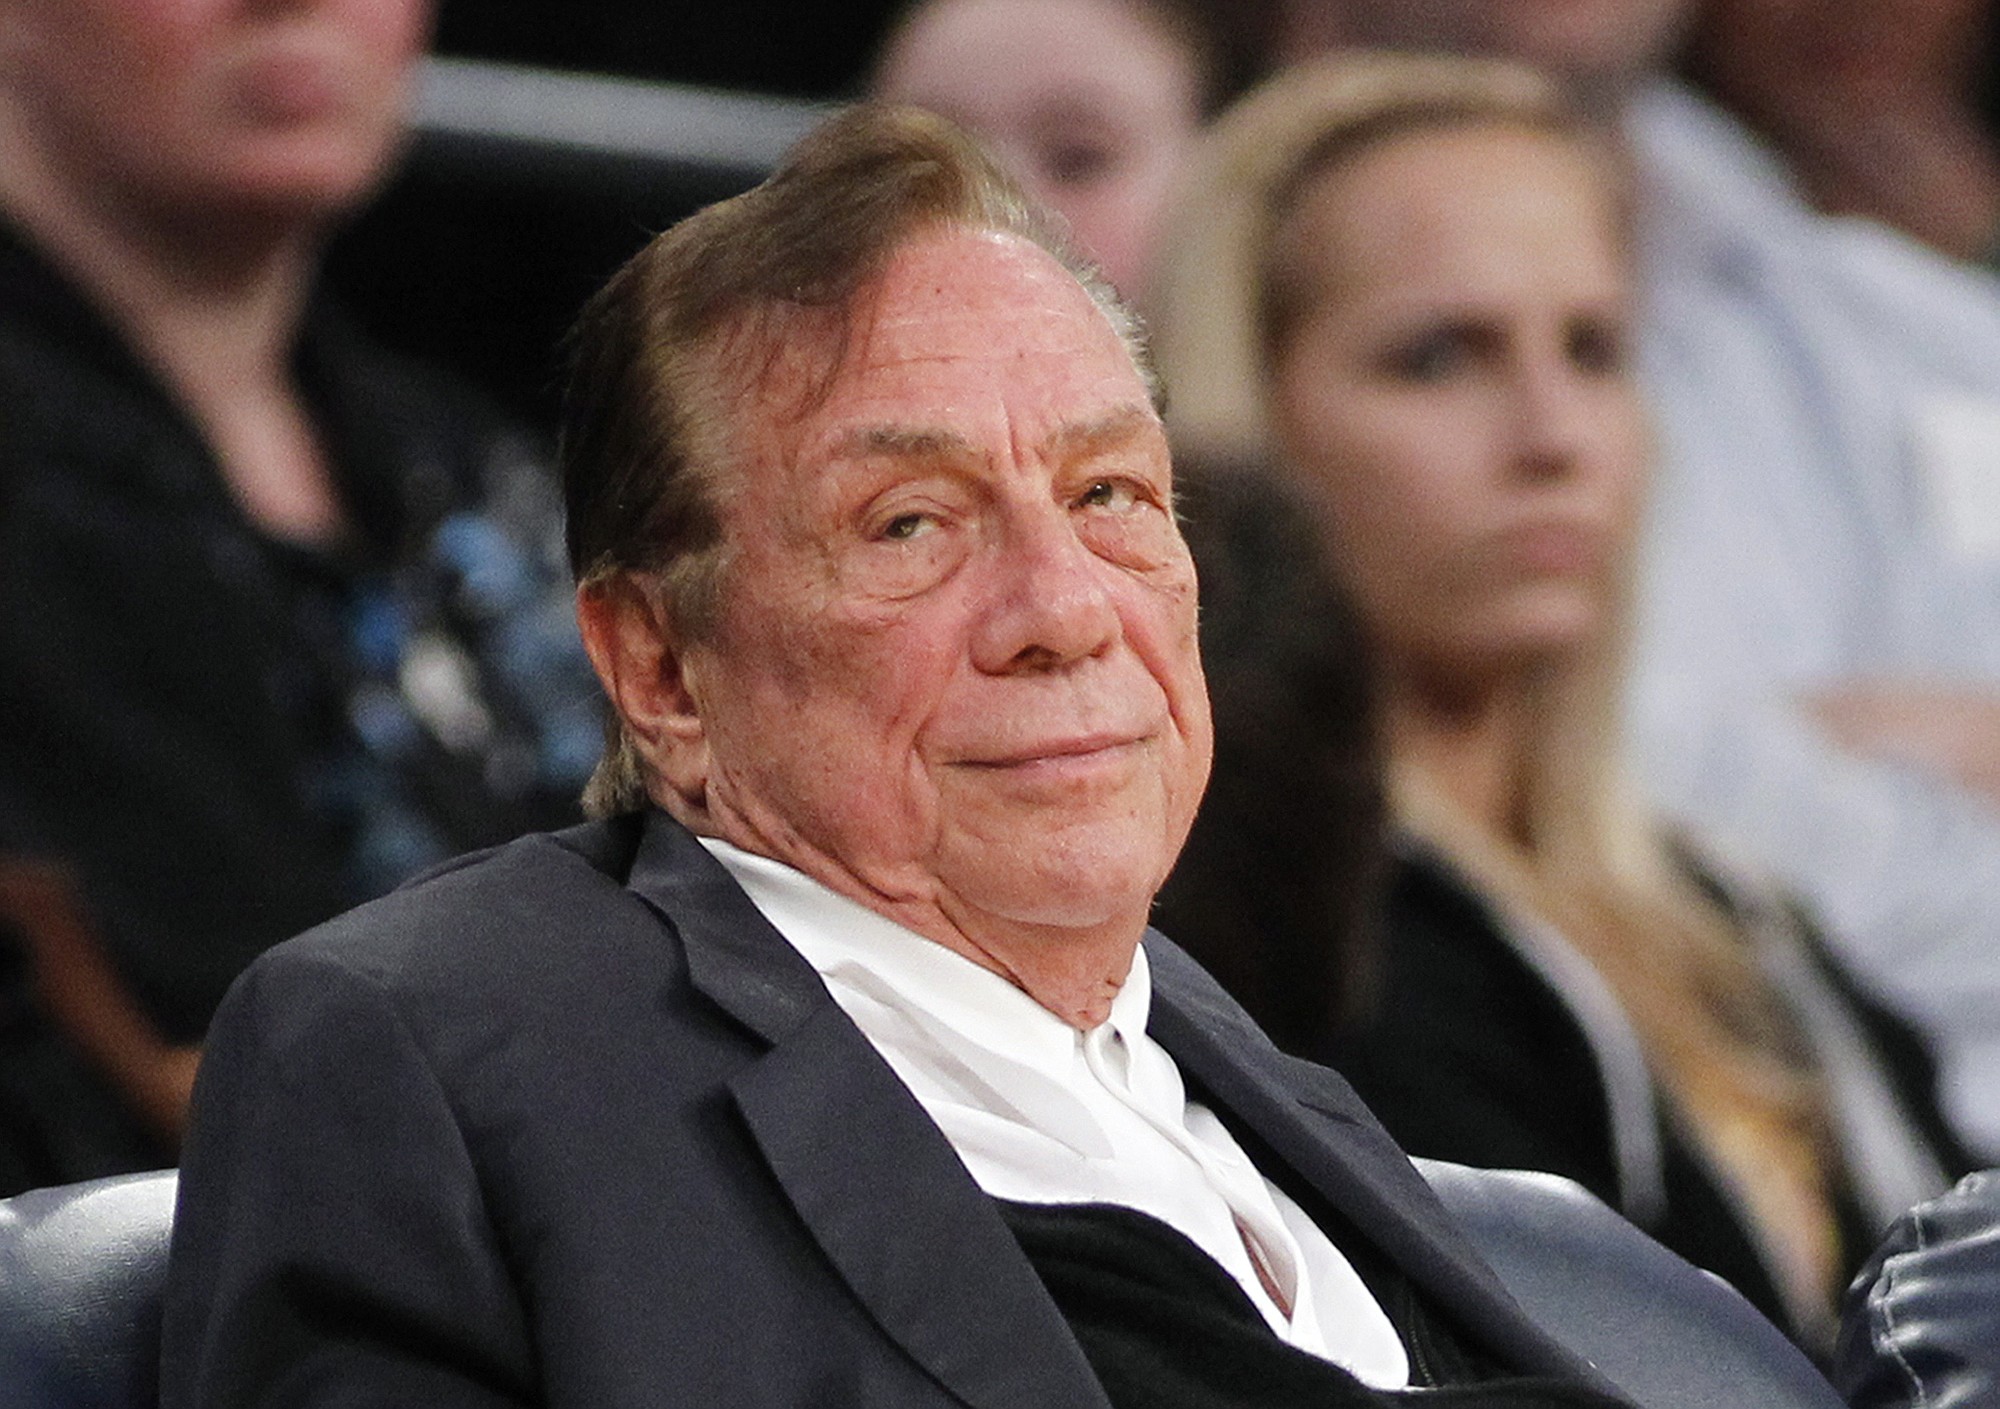 Clippers owner Donald Sterling watches the Clippers play the Los Angeles Lakers during an NBA preseason basketball game in Los Angeles in 2011.